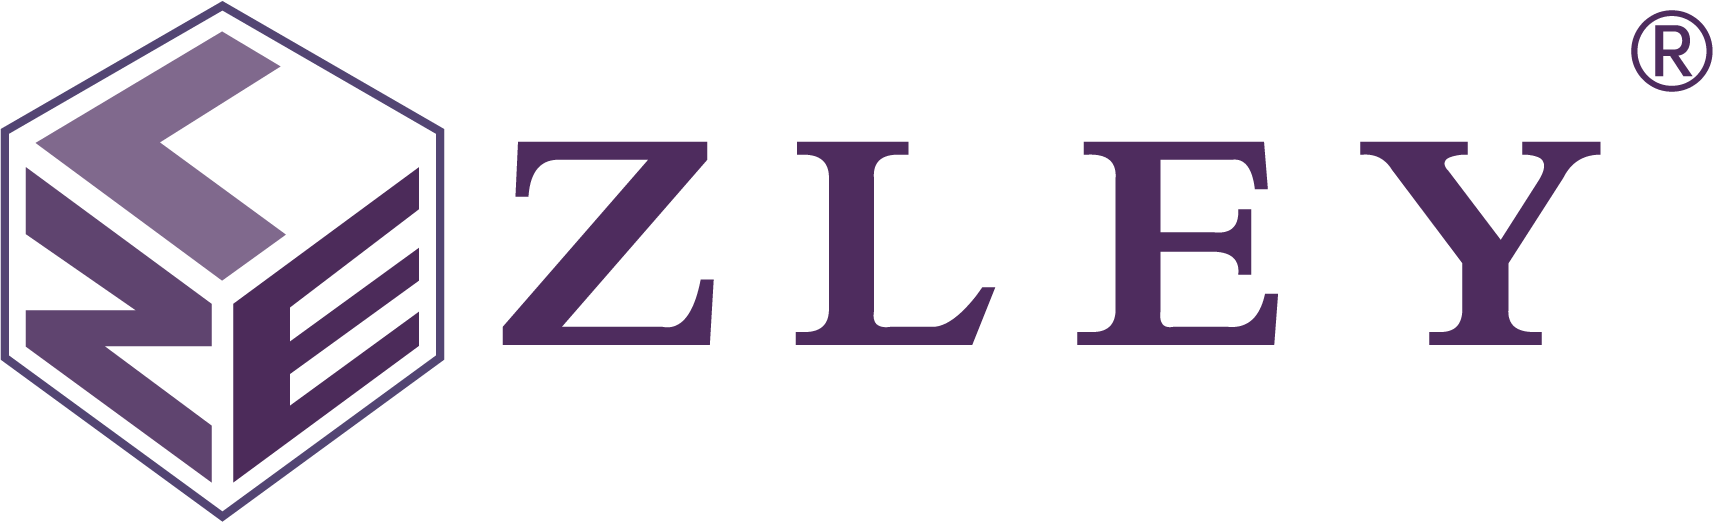 ZLEY Cosmetic Ingredients Manufacturer and Supplier